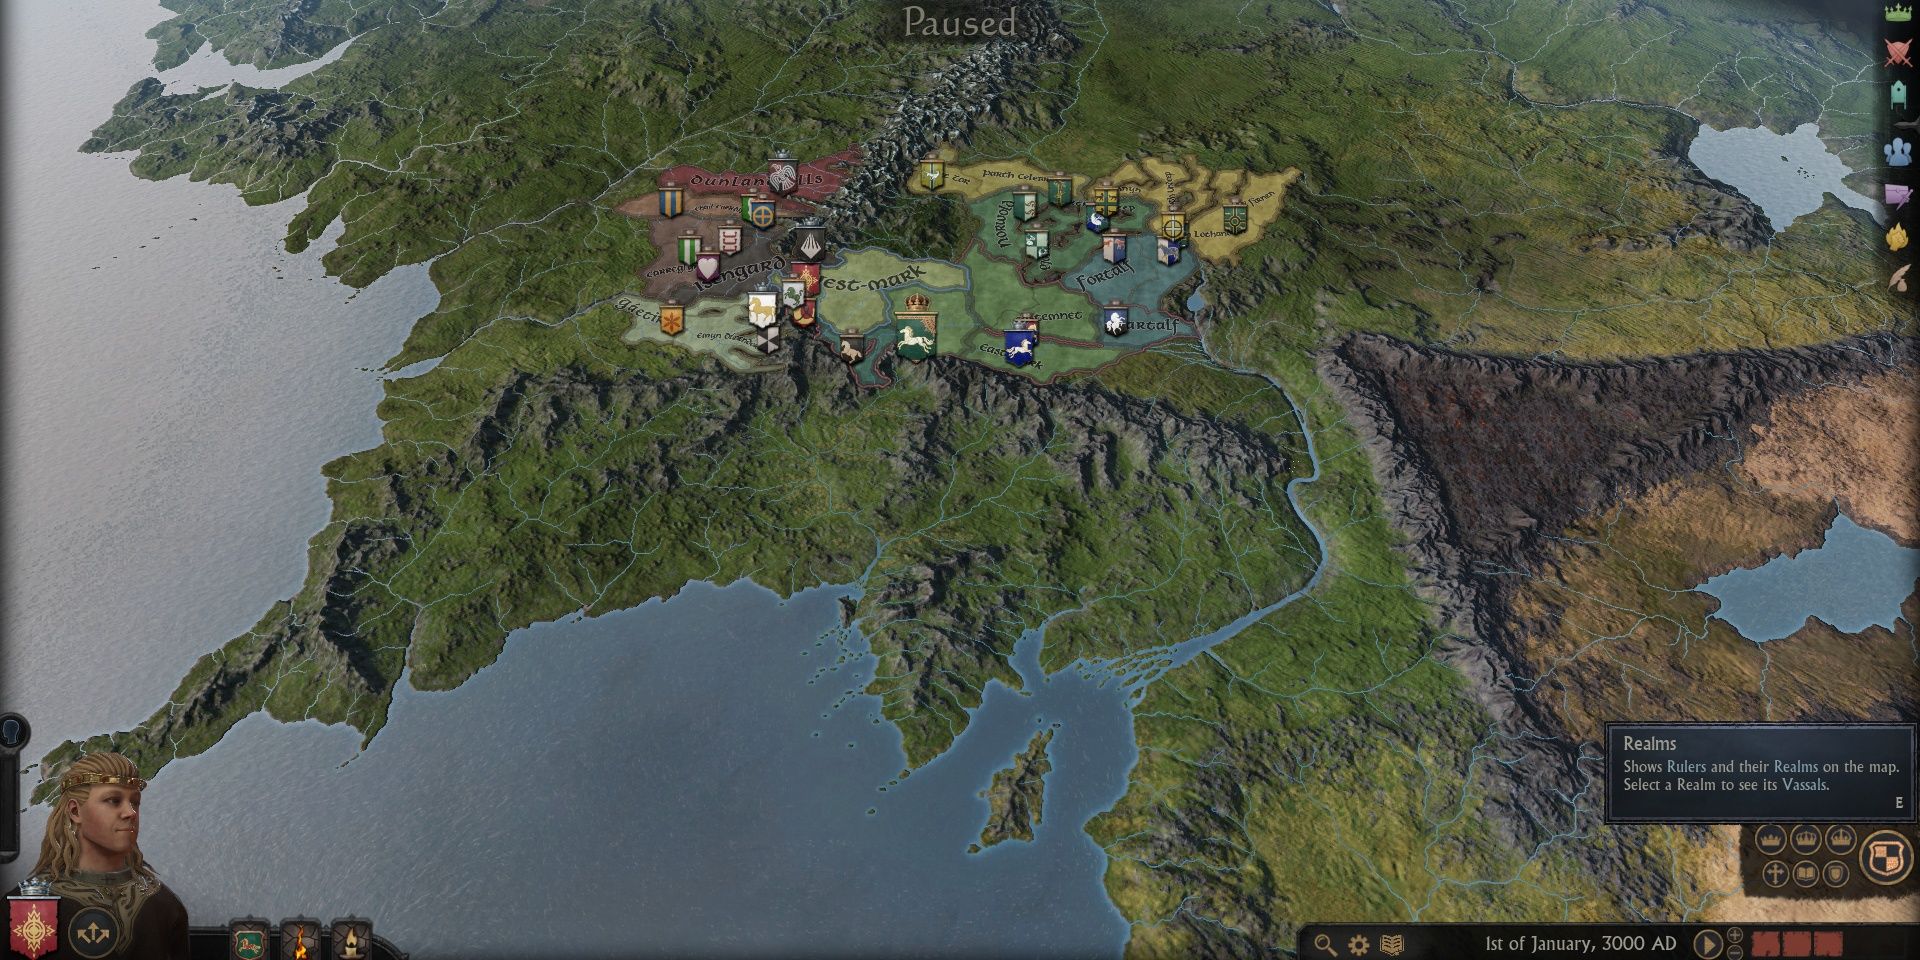 LotR: Realms In Exile mod for Crusader Kings 3